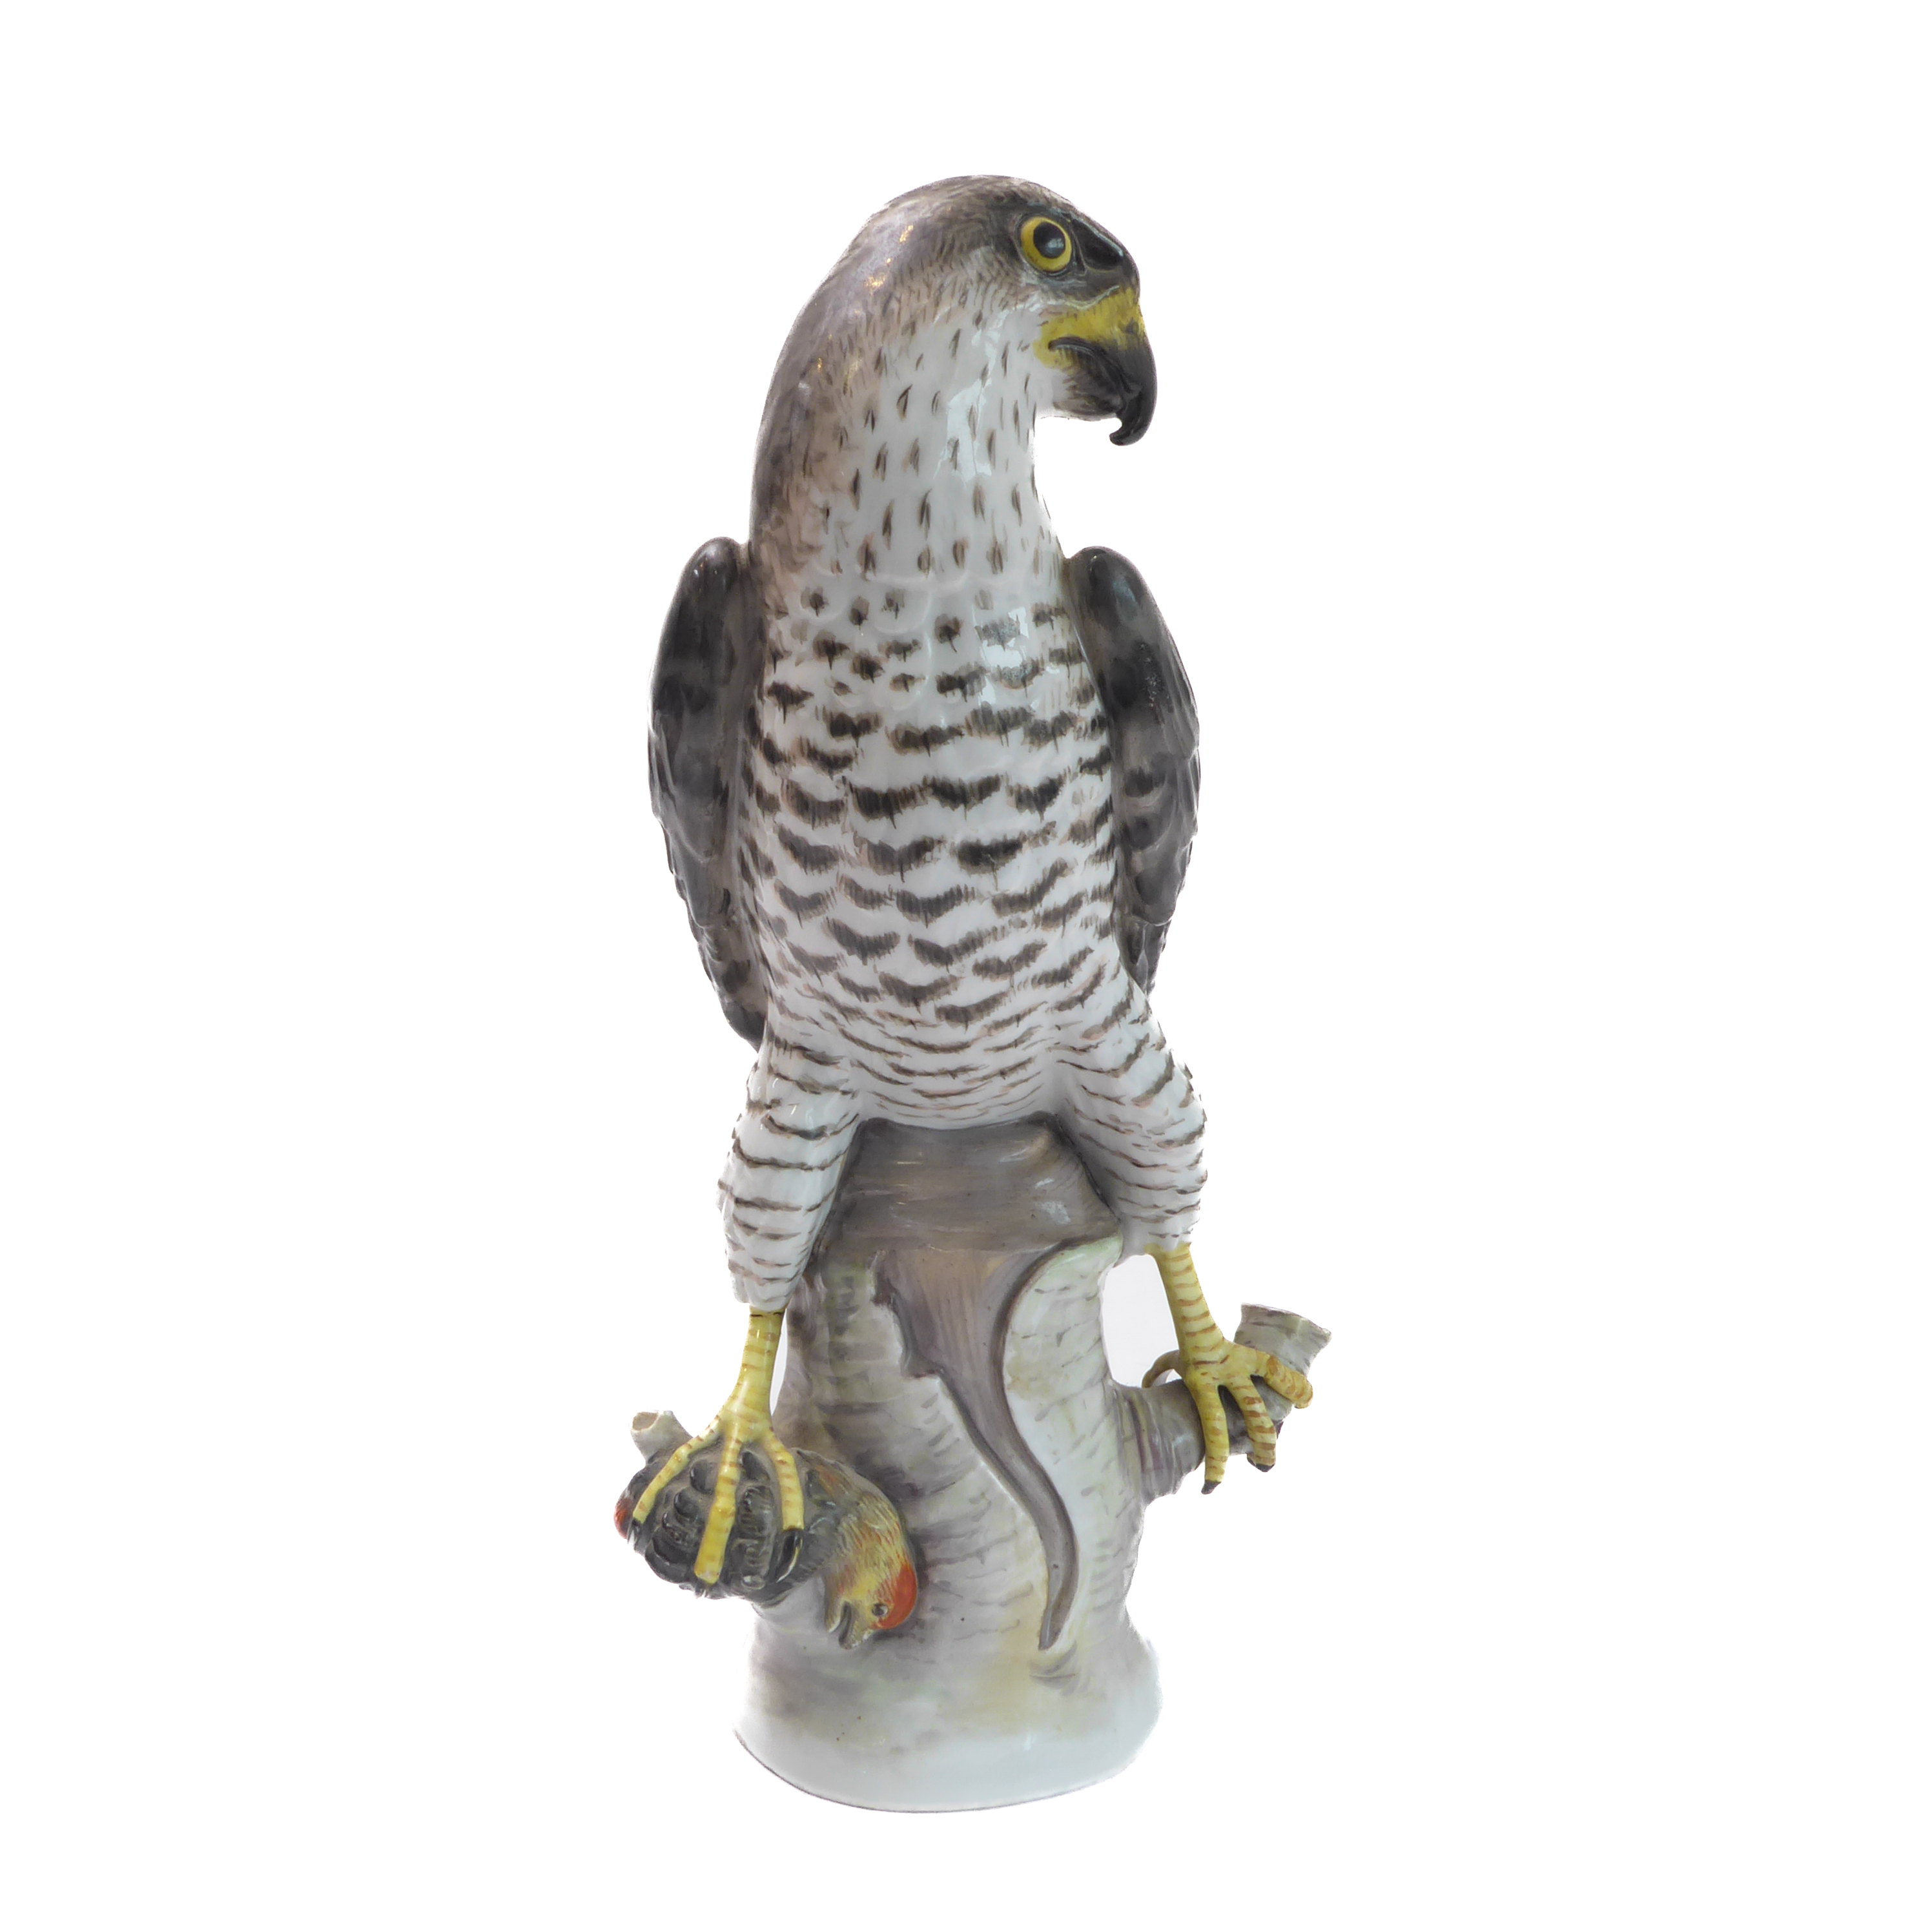 An early 20th century hand-decorated German porcelain model of a goshawk perched on a branch with - Image 2 of 9